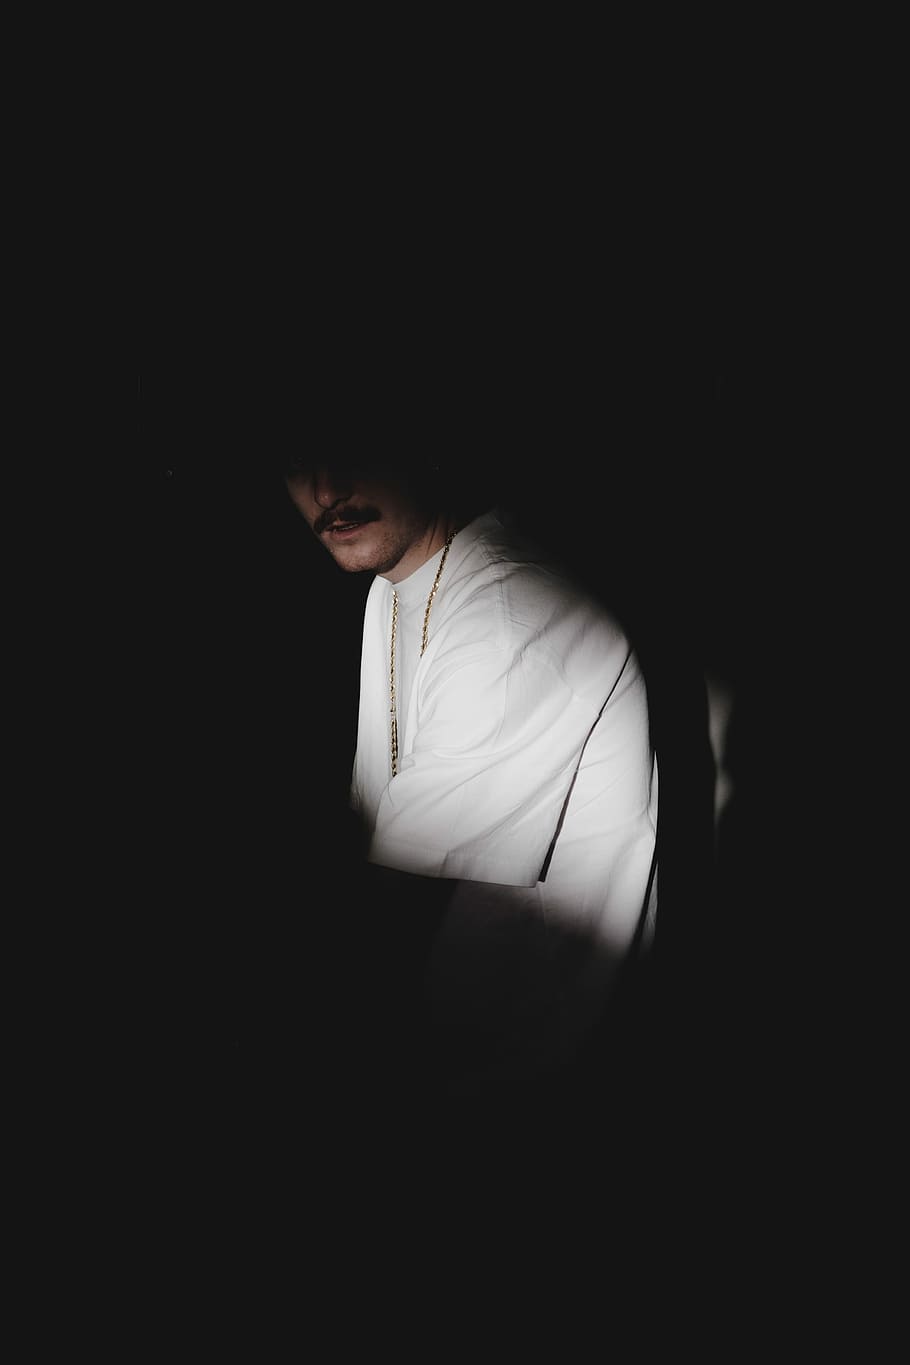 man wearing white top, man in the dark shadows, person, moustache